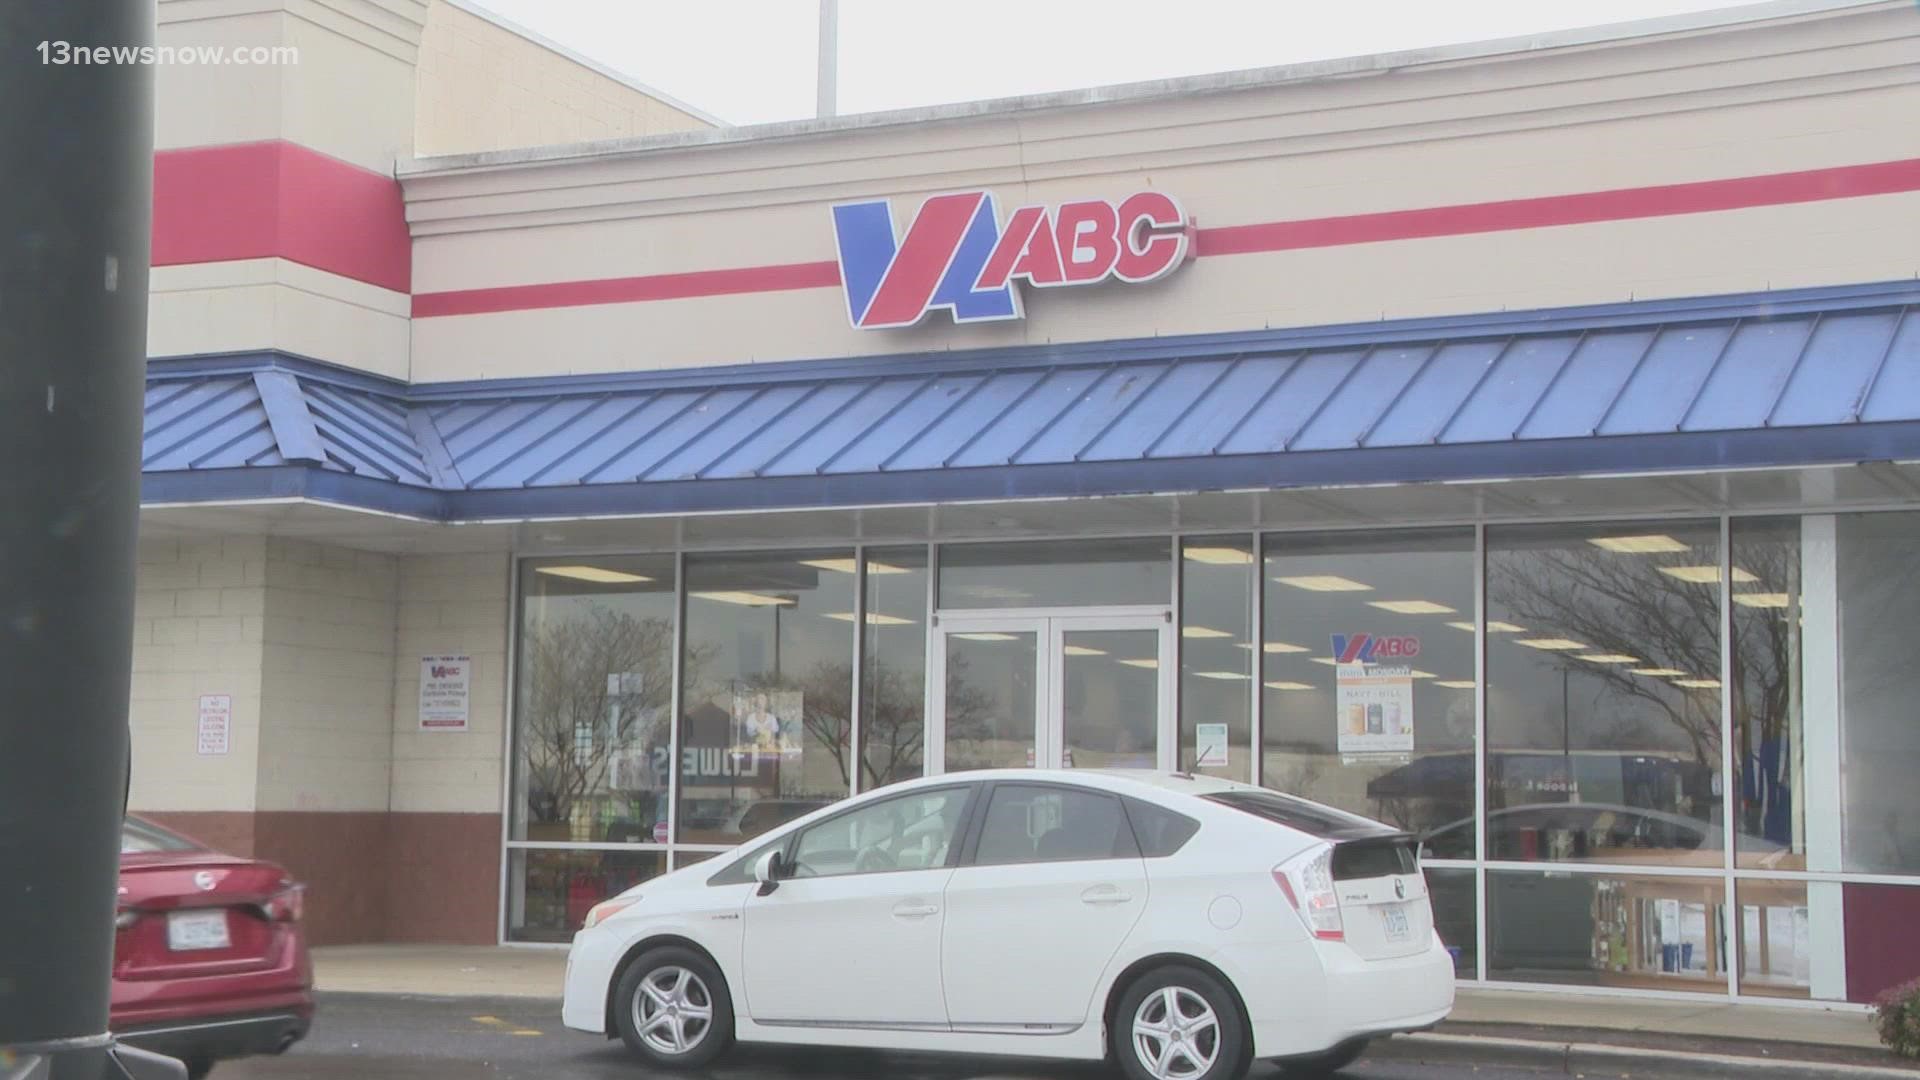 Virginians spent more than $1 billion on their favorite liquors at Virginia ABC stores.